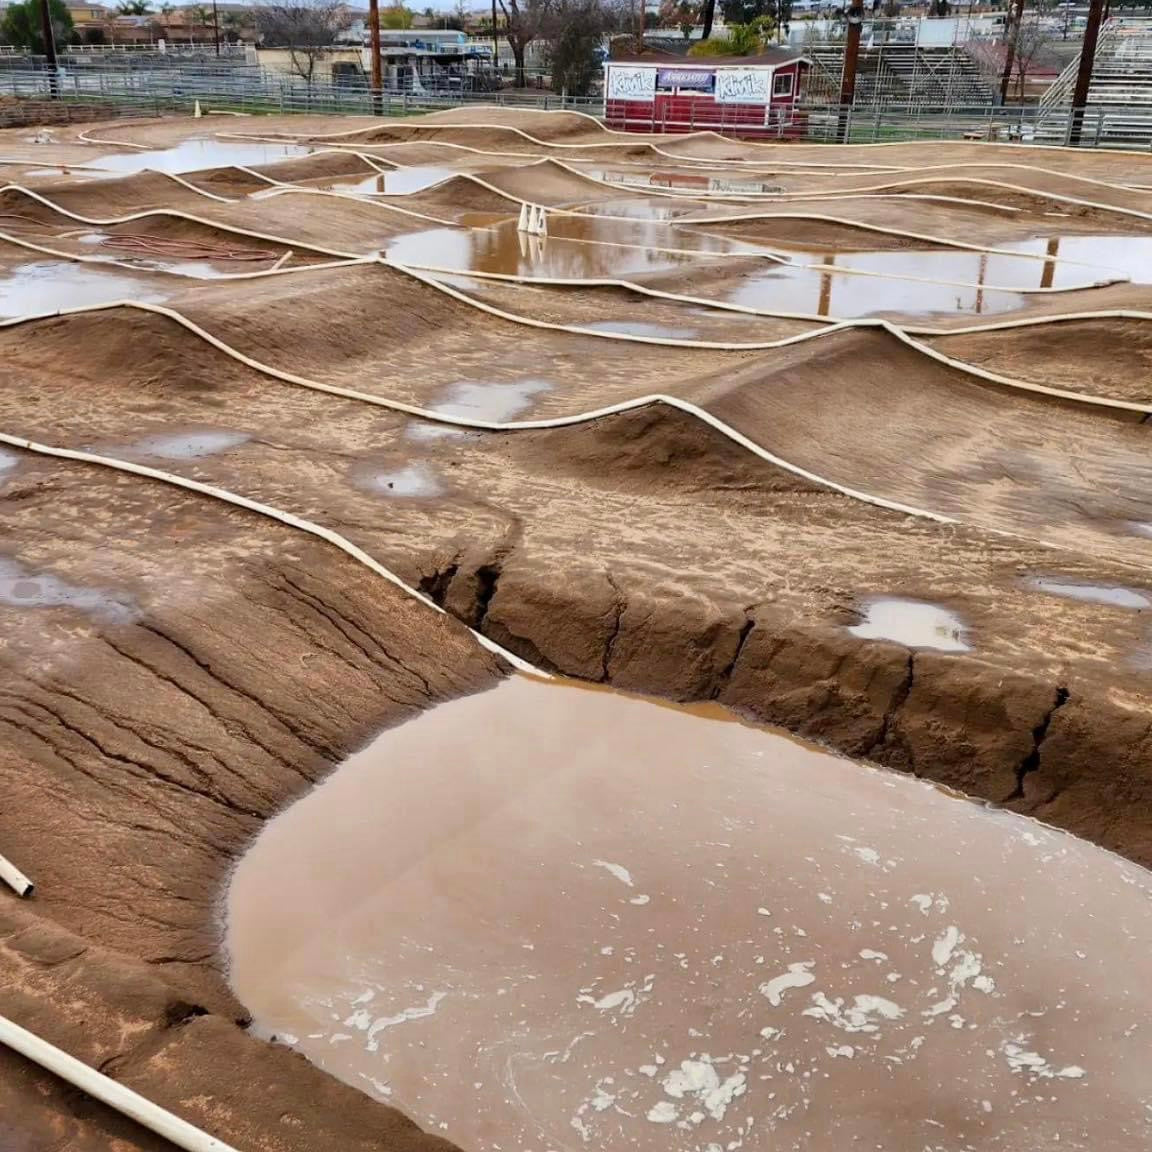 The Dirt Perris ready for Boats after some rain